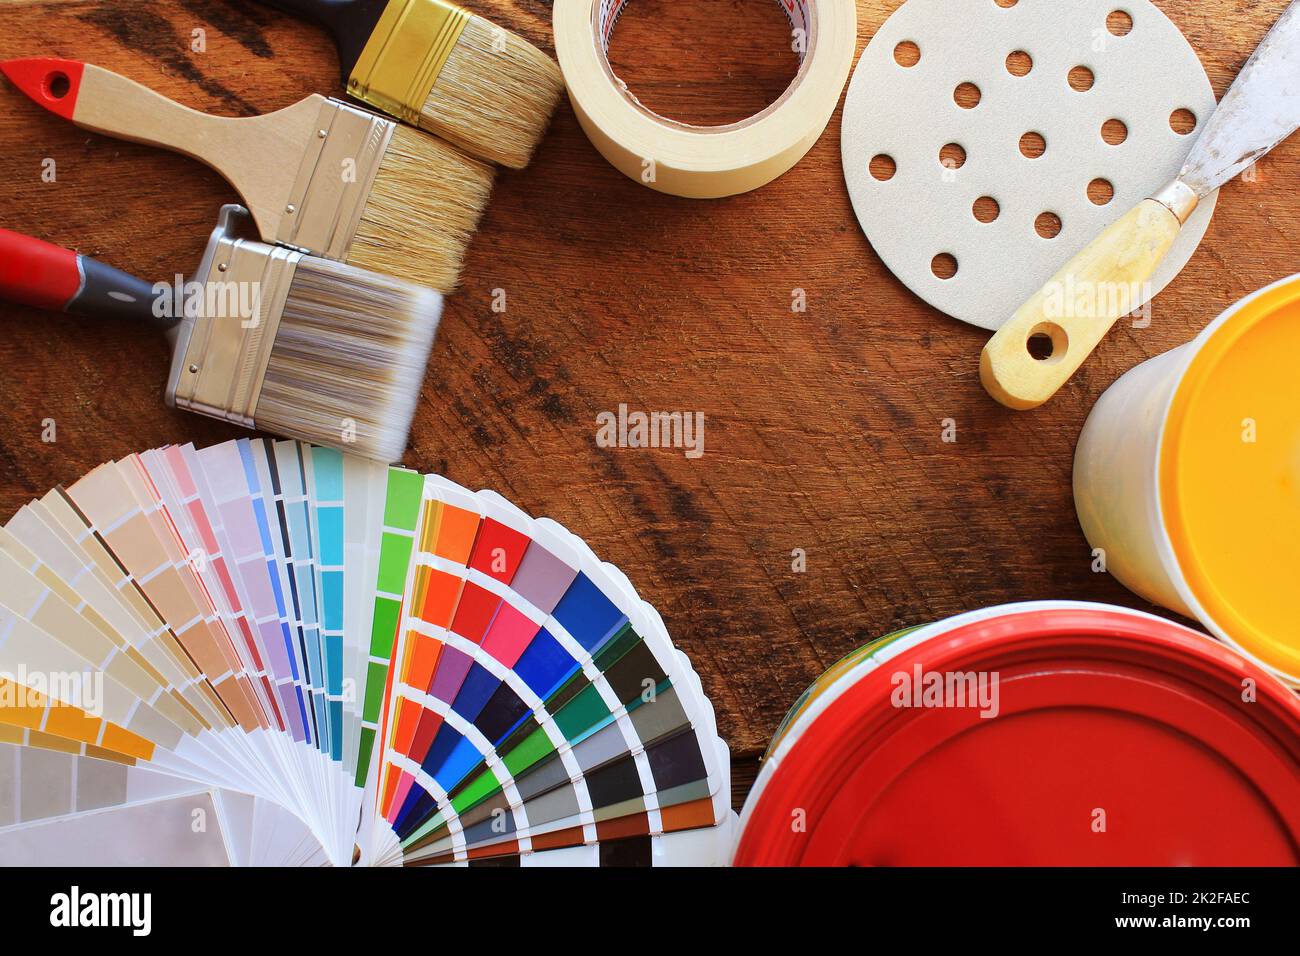 various painting tools, accessories and color samples for home renovation on wooden background Stock Photo